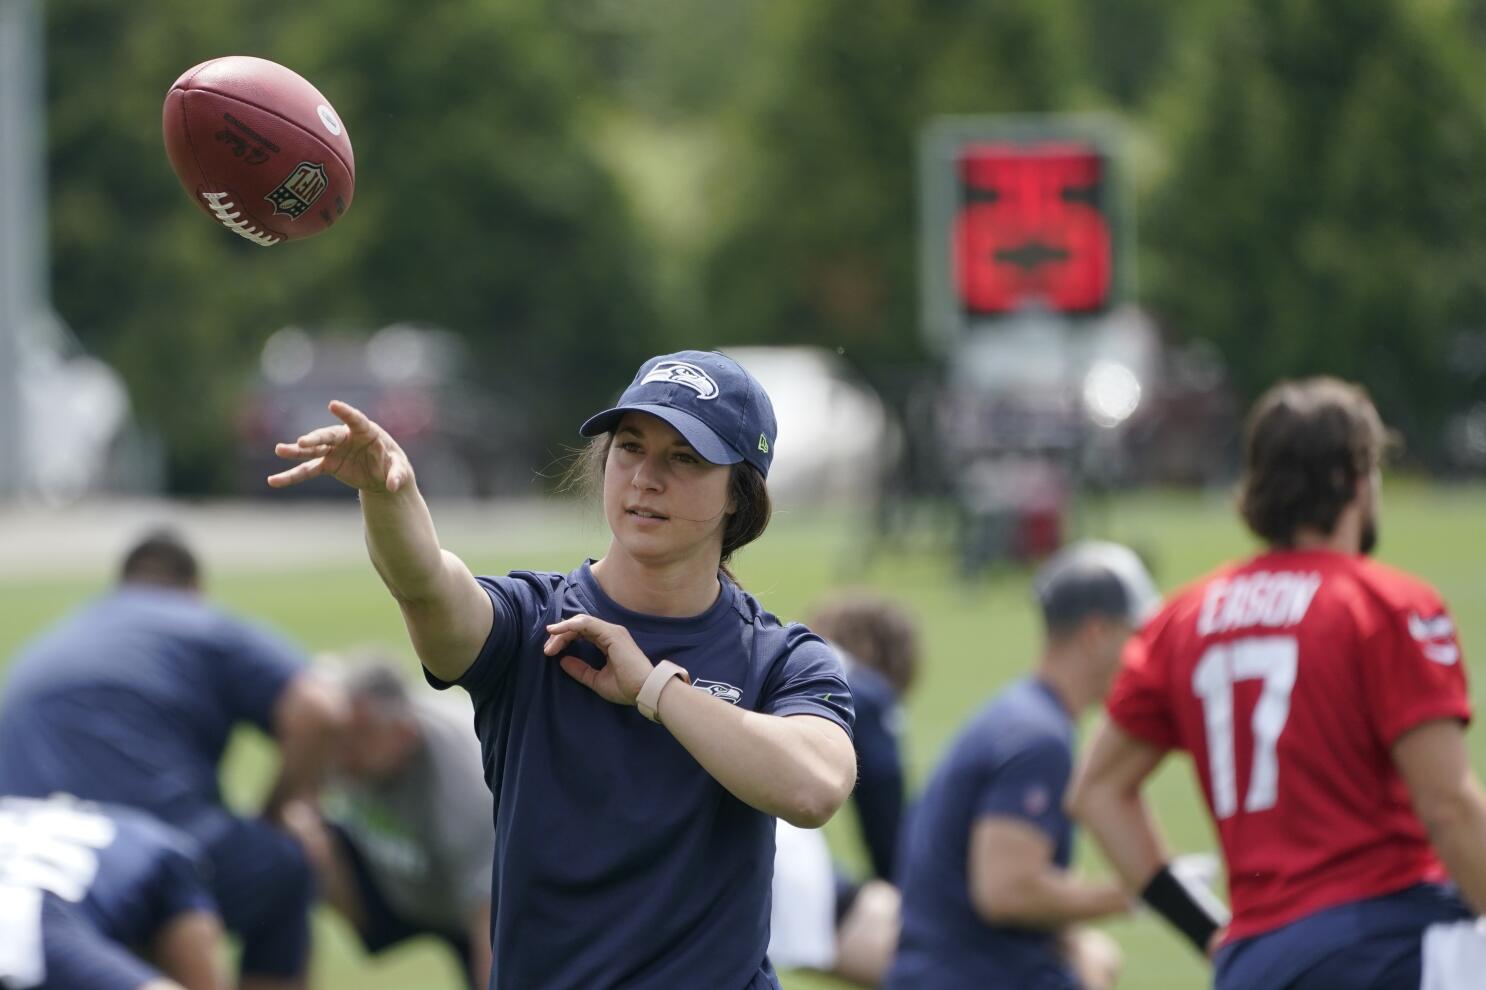 Next Woman Up: Angela Baker, Offensive Assistant for the New York Giants